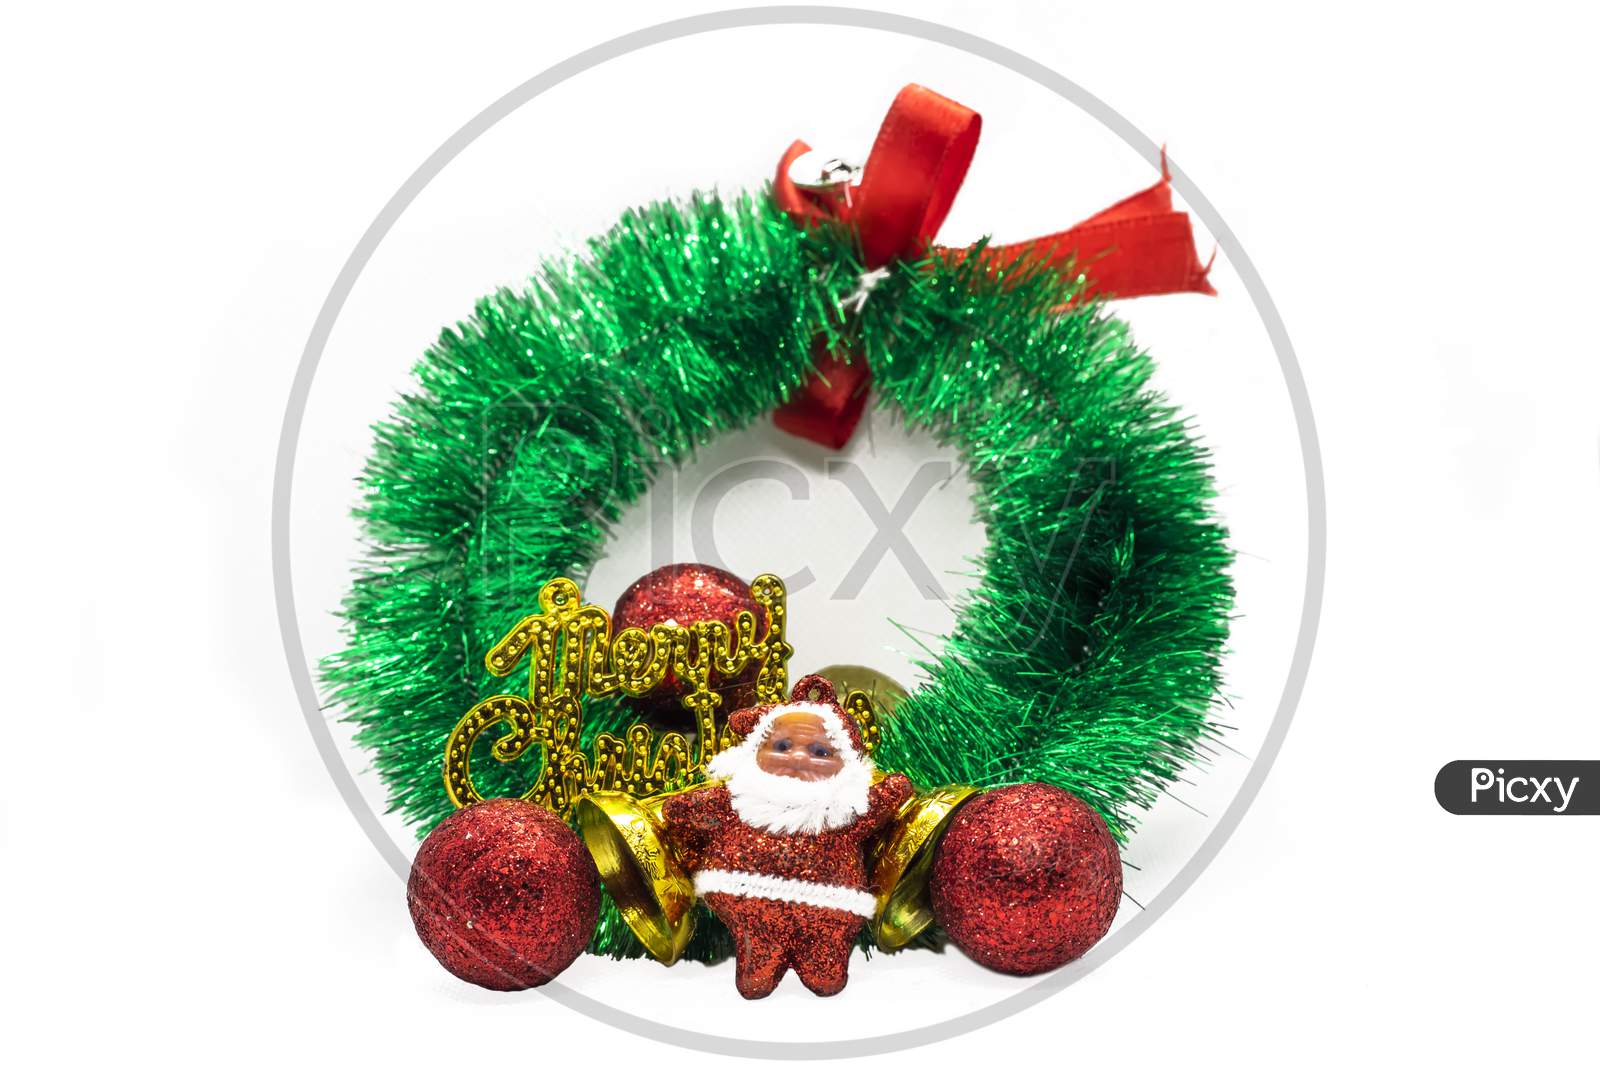 Christmas Garland Decorated With Ornaments, Bubbles And Santa Claus Isolated On A White Background